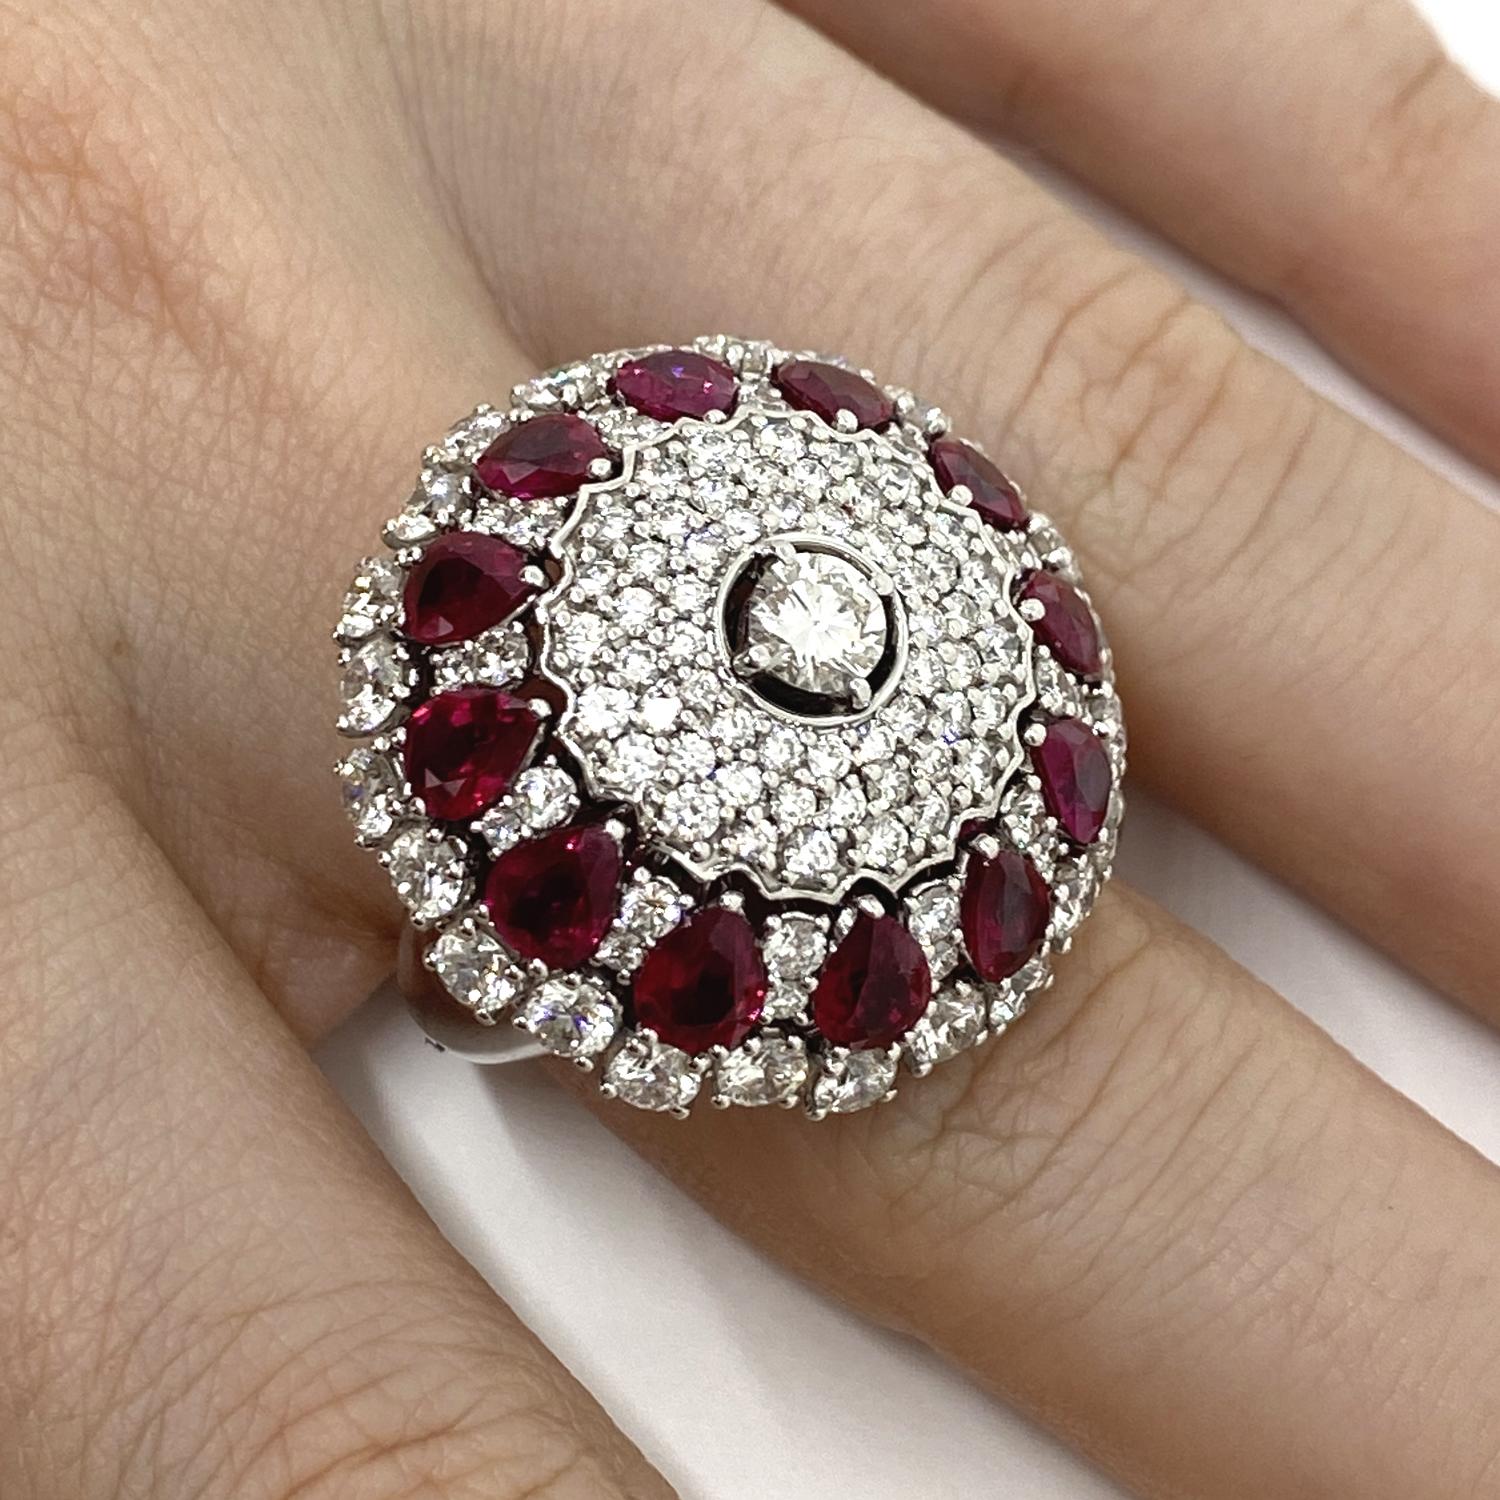 Ring made of 18kt white gold with natural brilliant-cut diamonds for ct.4.99 and natural ruby drops for ct .4.05

Welcome to our jewelry collection, where every piece tells a story of timeless elegance and unparalleled craftsmanship. As a family-run